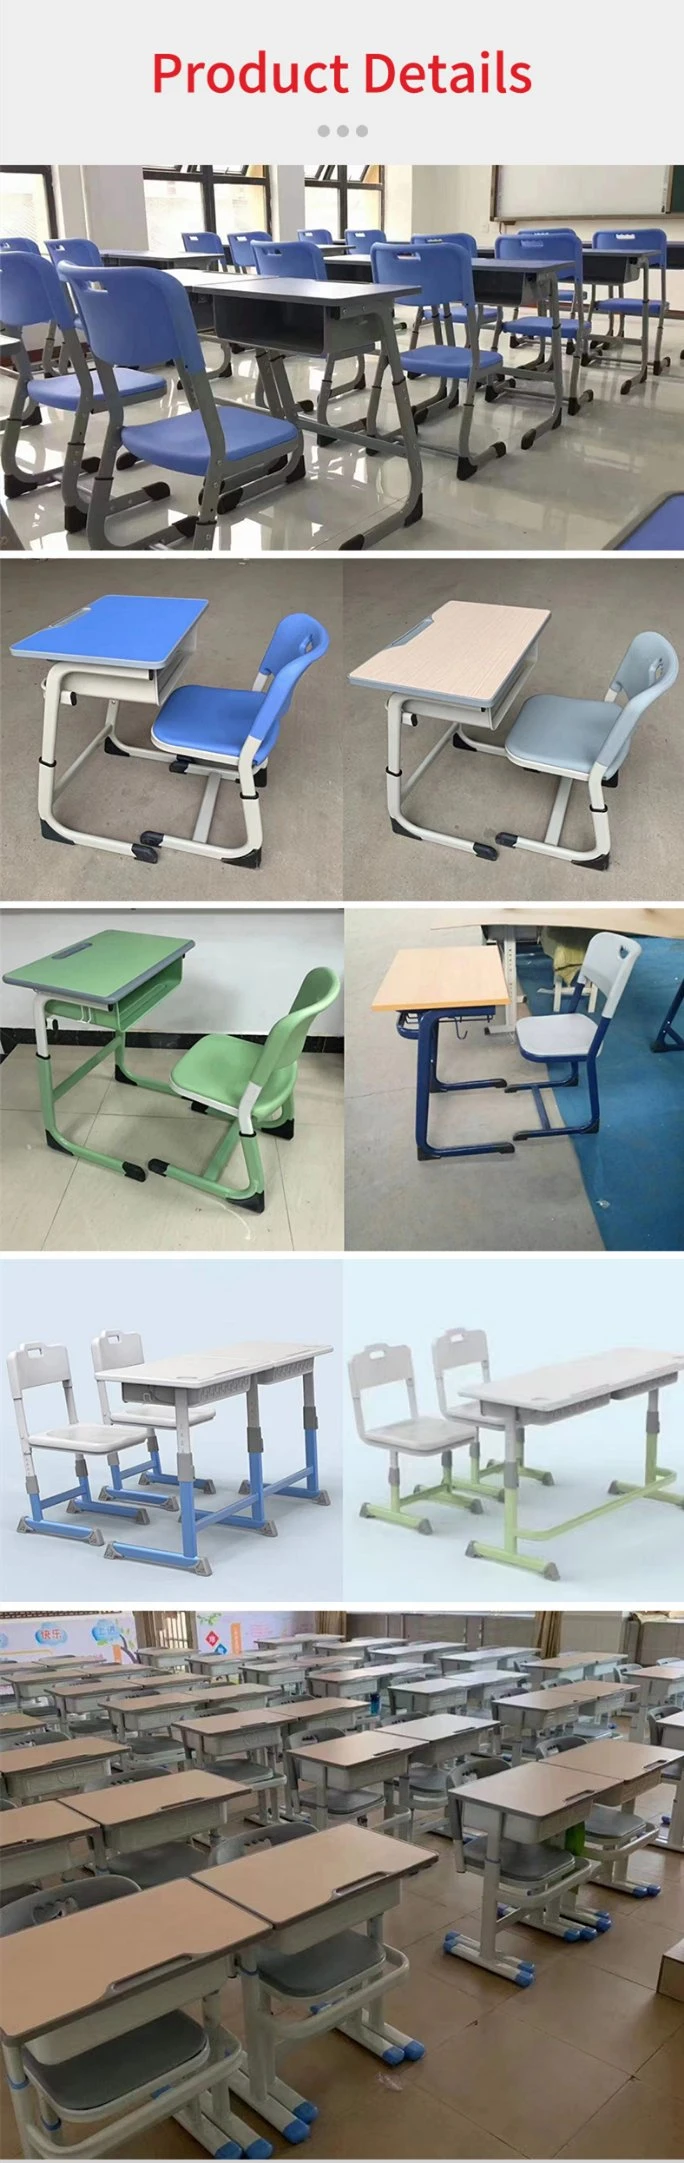 Single Metal Primary School Wood Desk and Chair